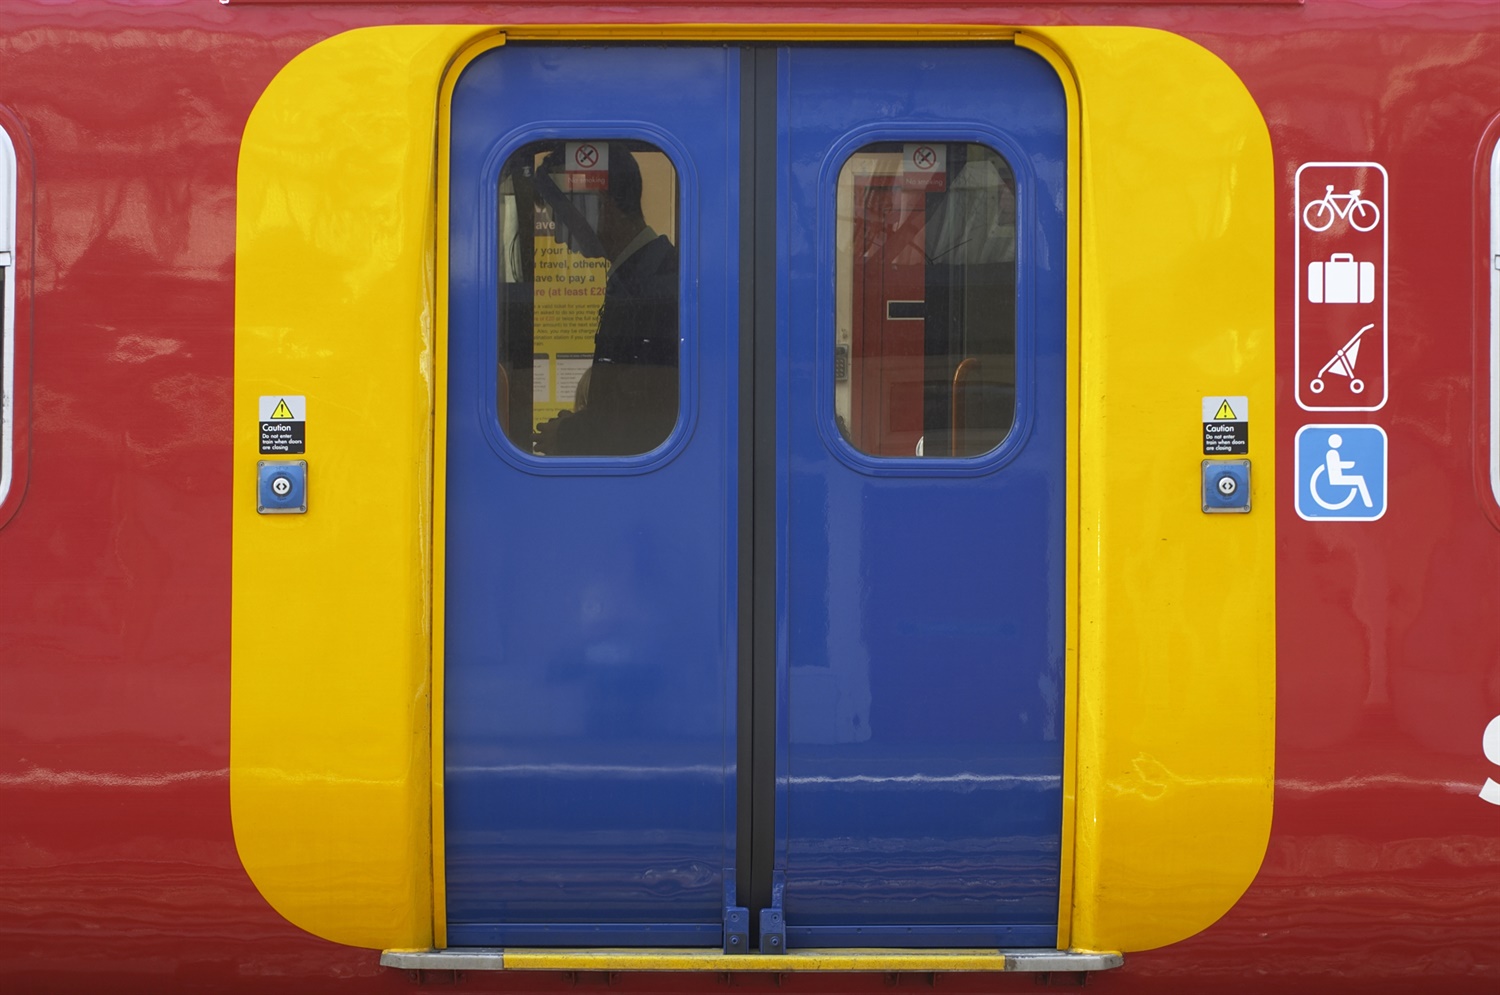 DfT calls for new technology to transform transport accessibility, but union warns against ‘faceless’ railway